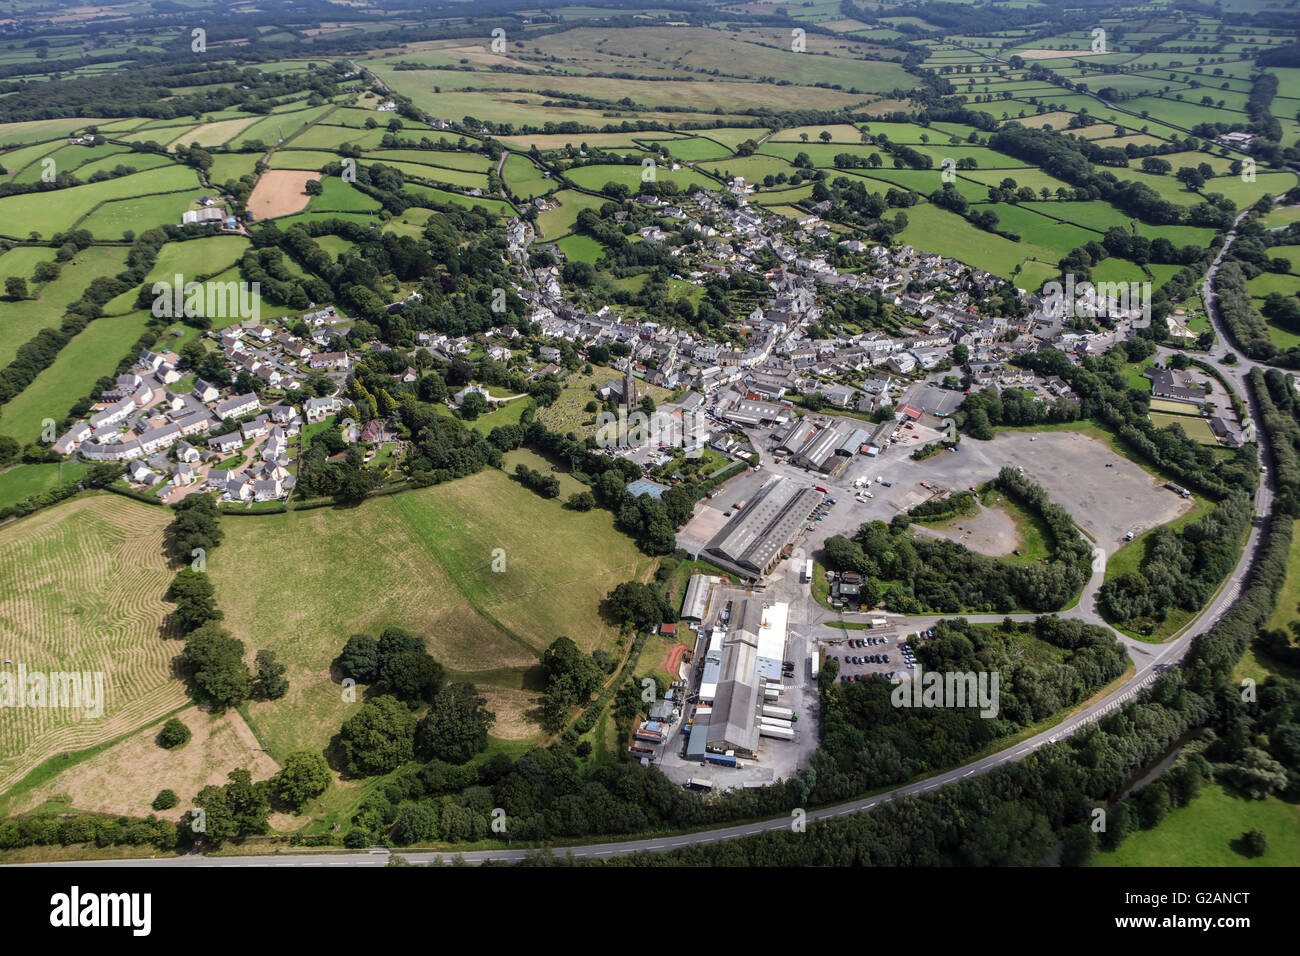 An aerial view of the Devon market town of Hatherleigh Stock Photo